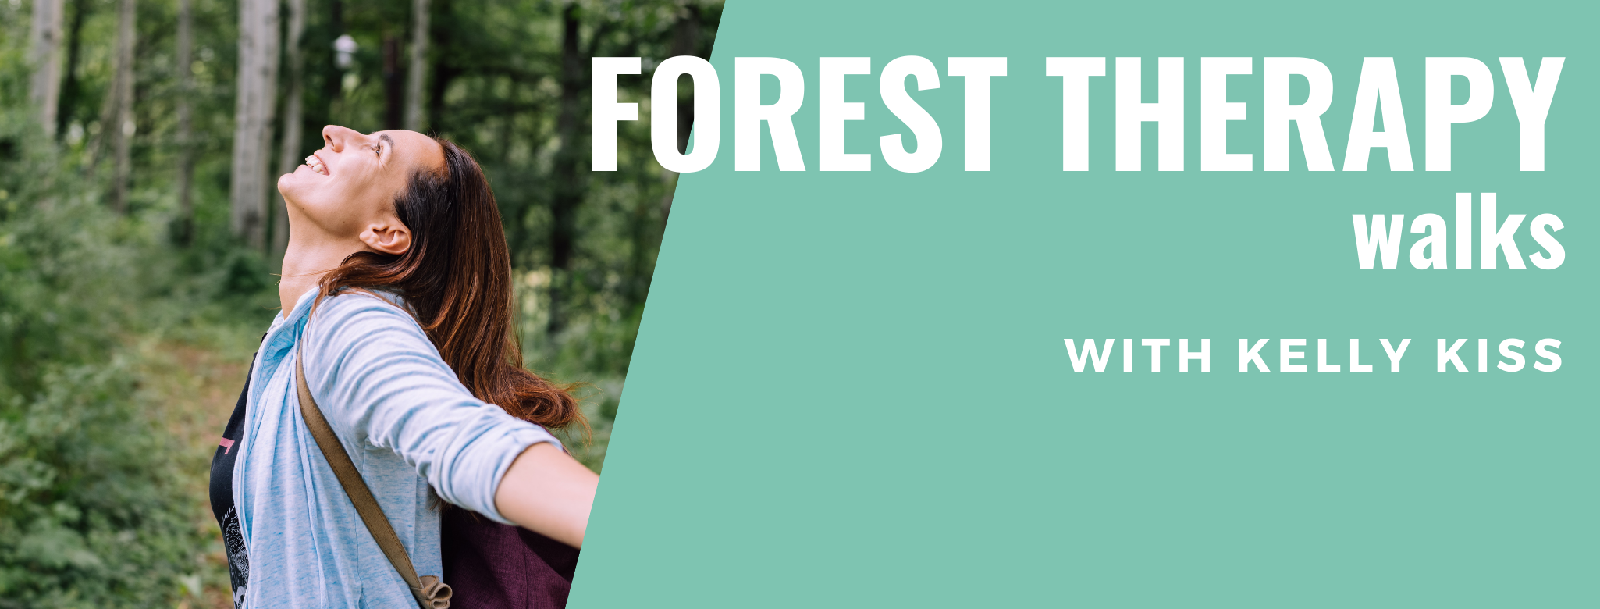 ForestTherapyBanner.png